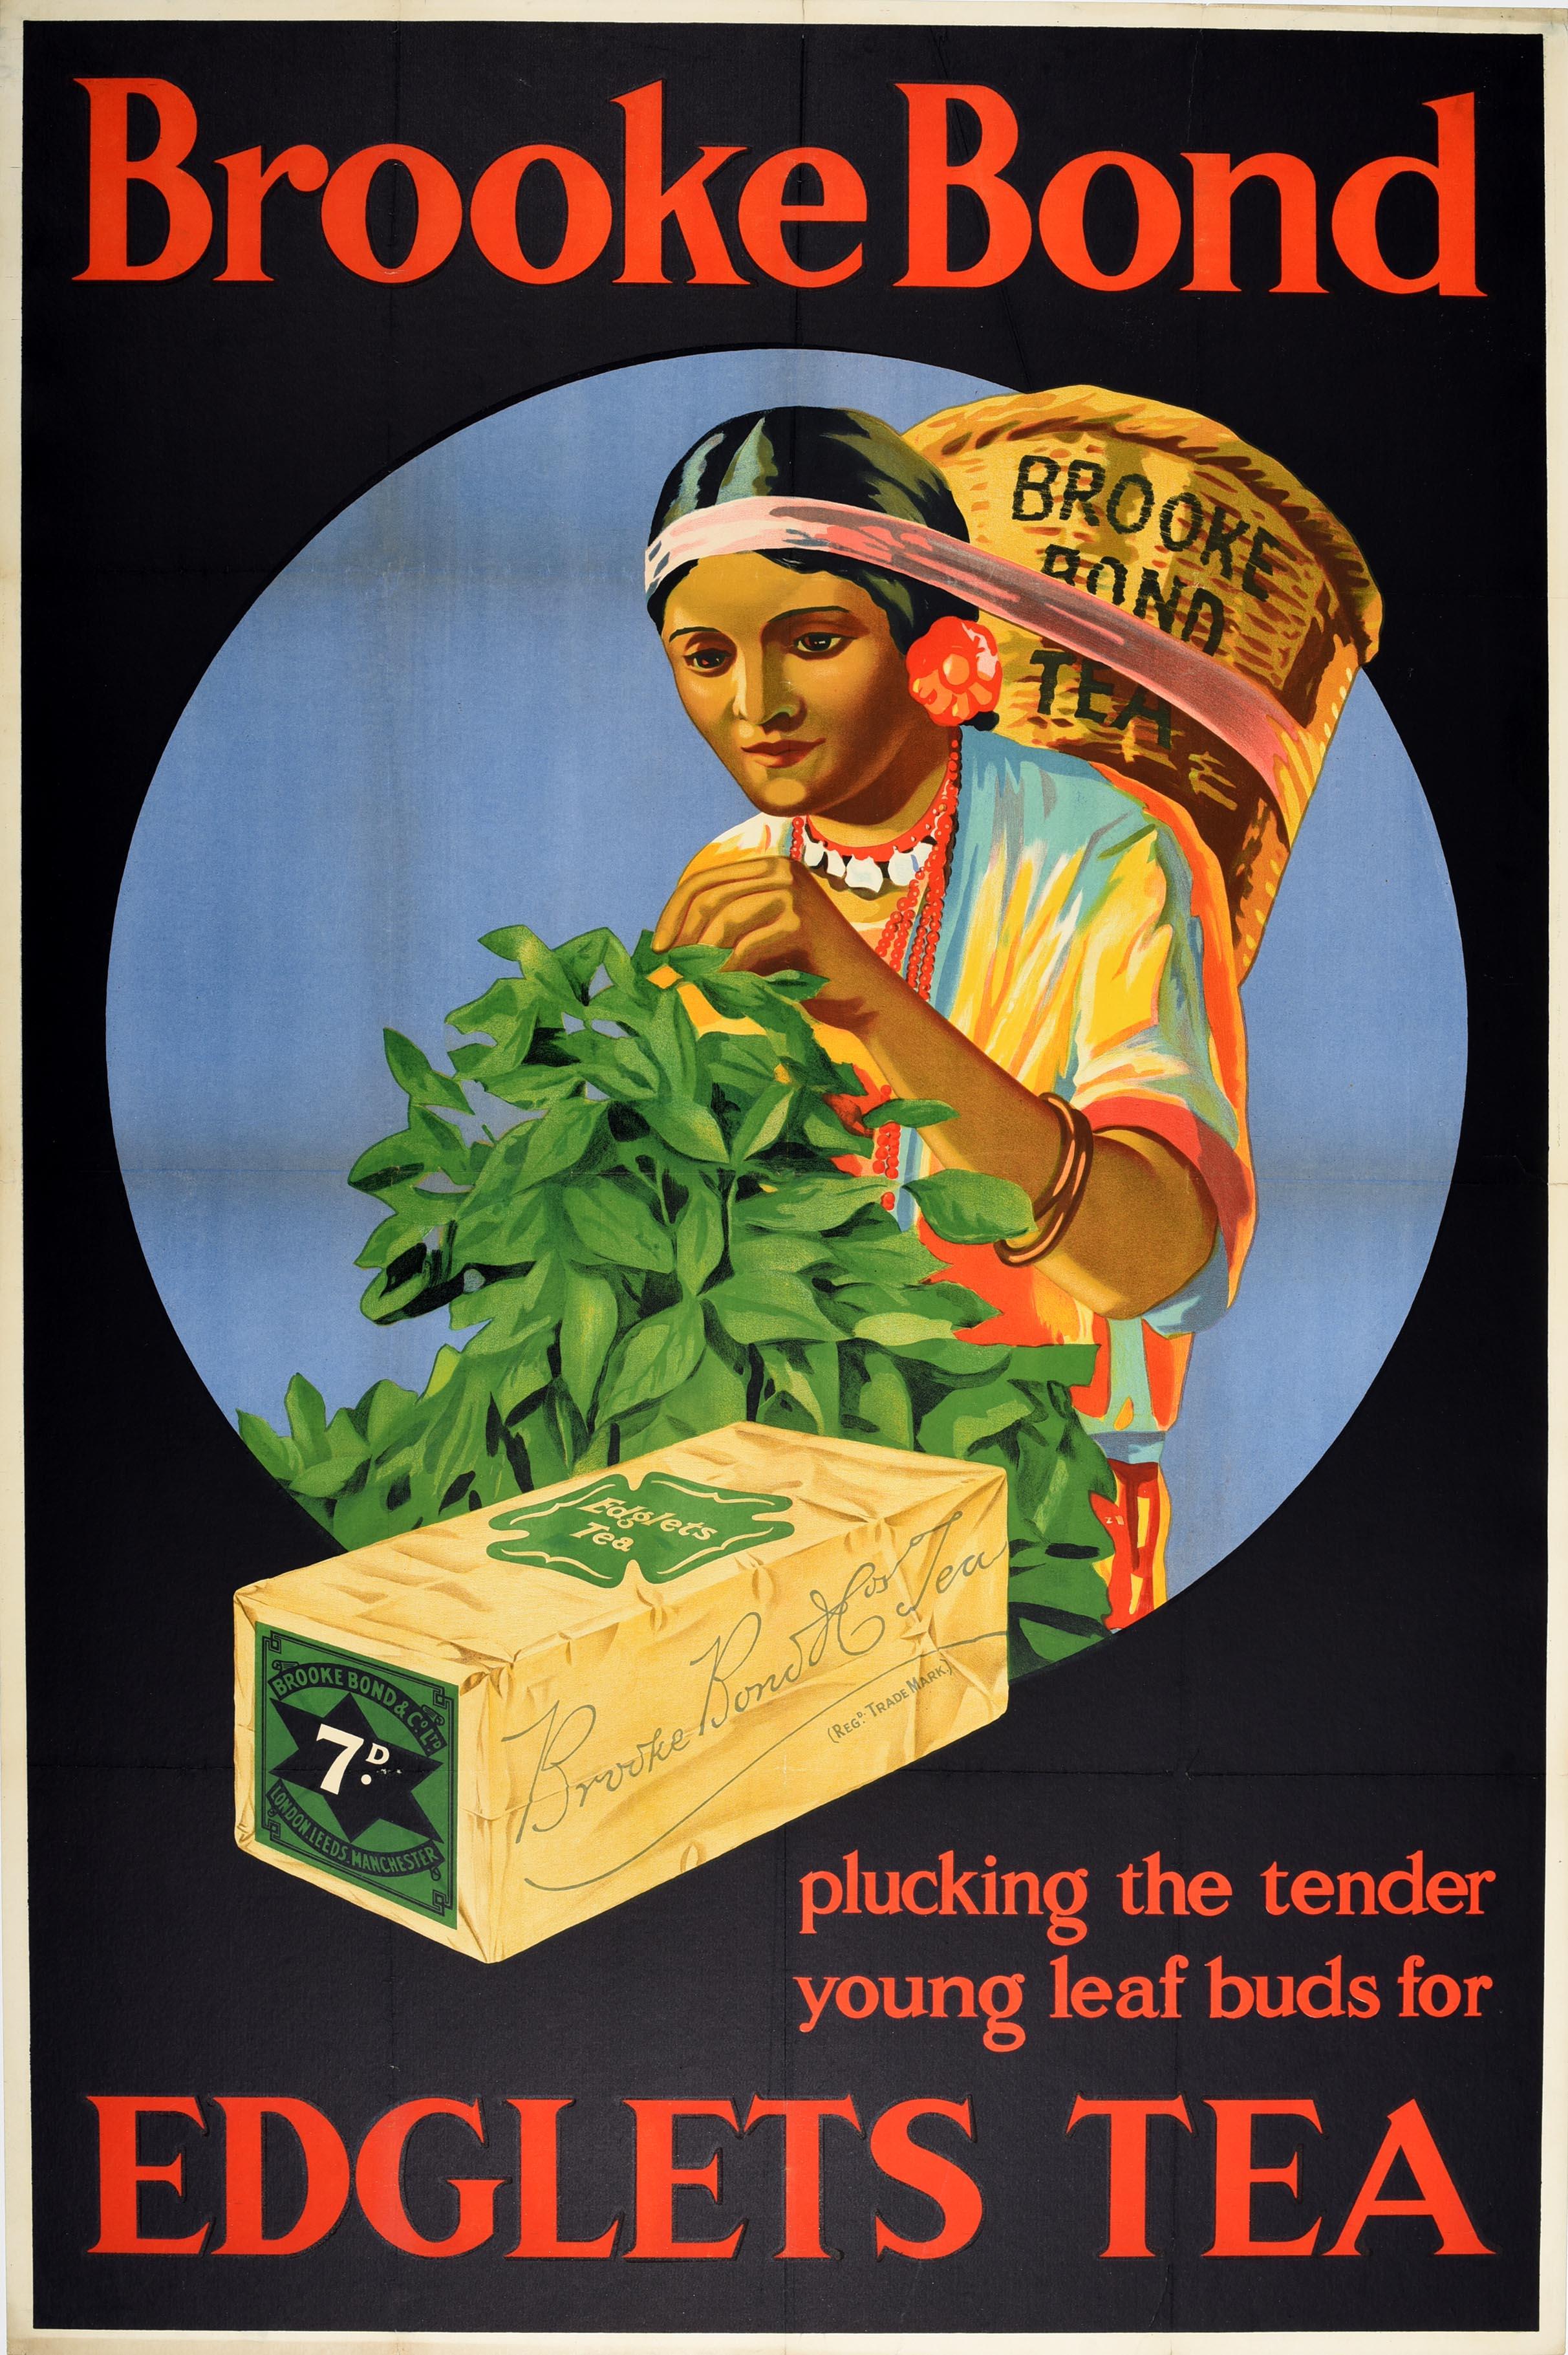 Original vintage advertising poster for Brooke Bond - Plucking the tender young leaf buds for Edglets Tea - featuring a great image of a tea picker wearing a colourful dress with a Brooke Bond Tea basket on her head and a box of tea in the